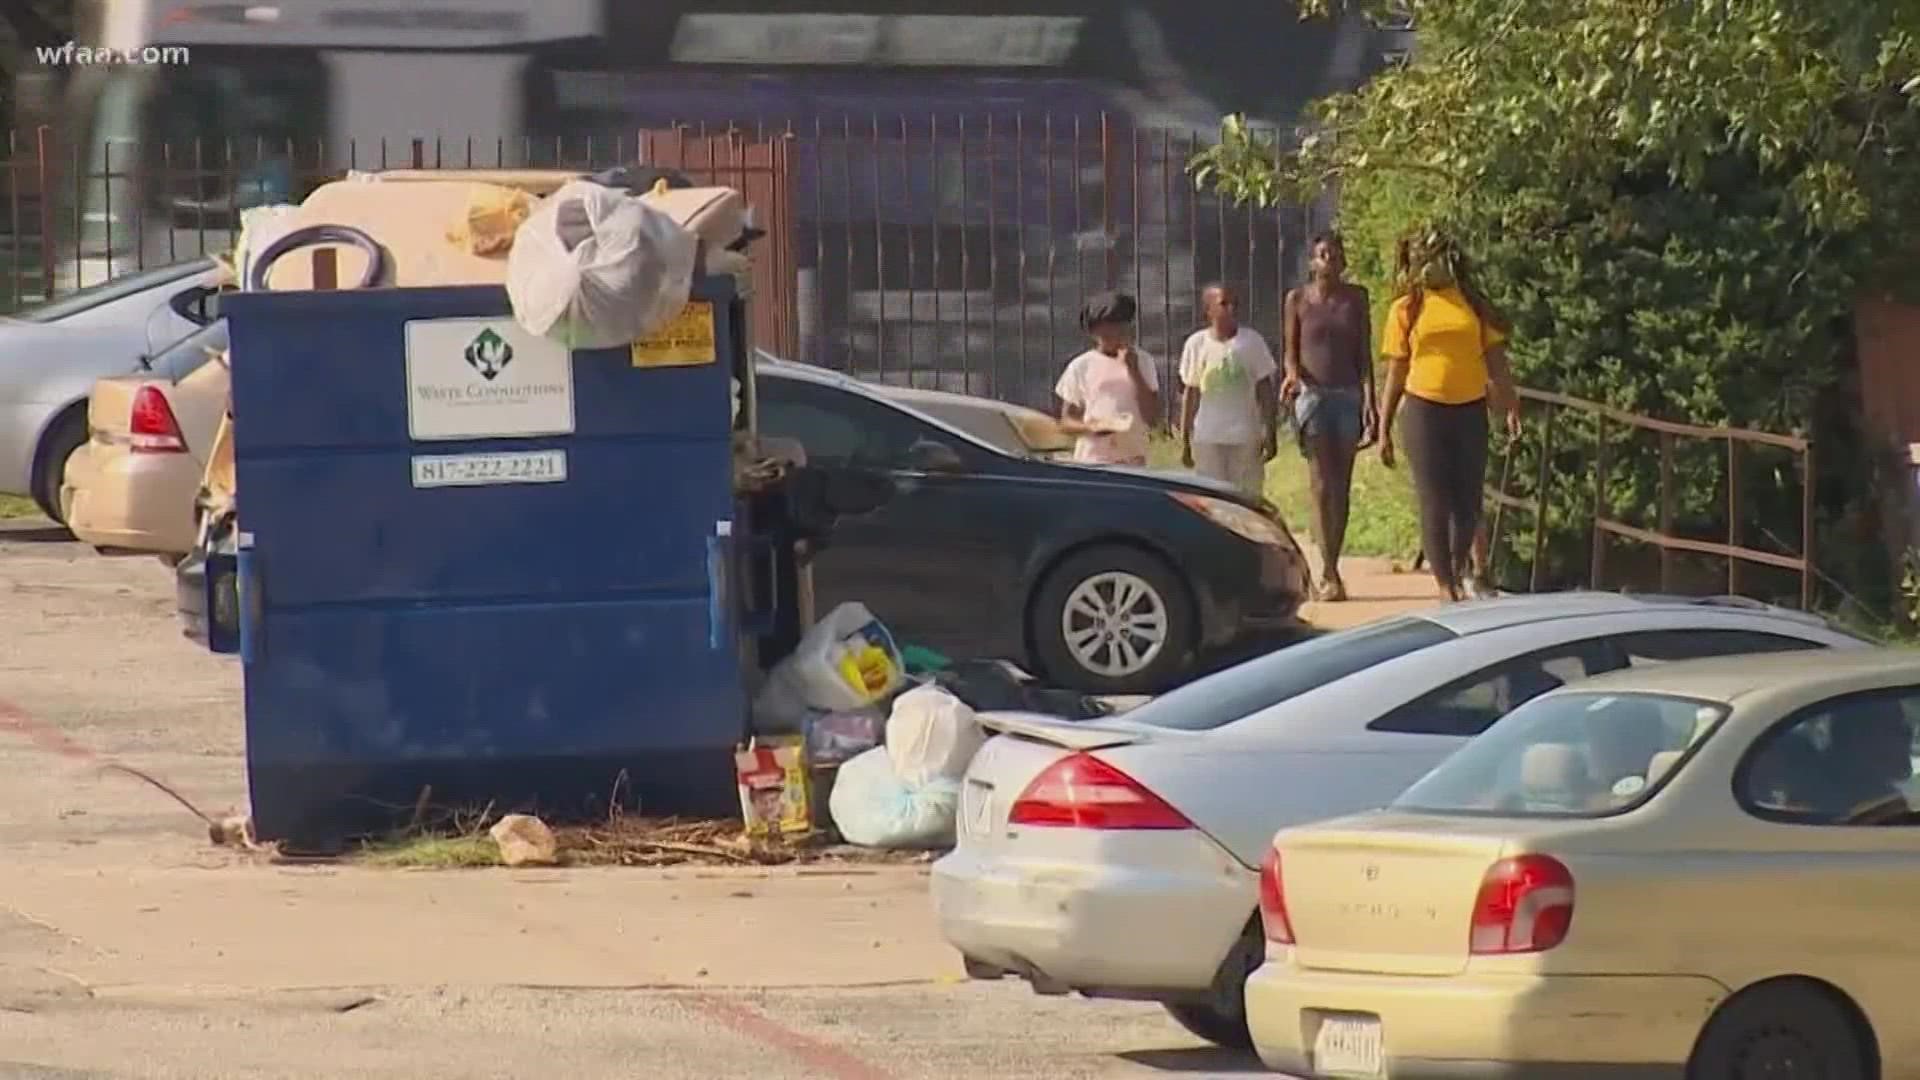 The Fort Worth mayor announced the arrival of a new effort aimed at helping communities most in need.